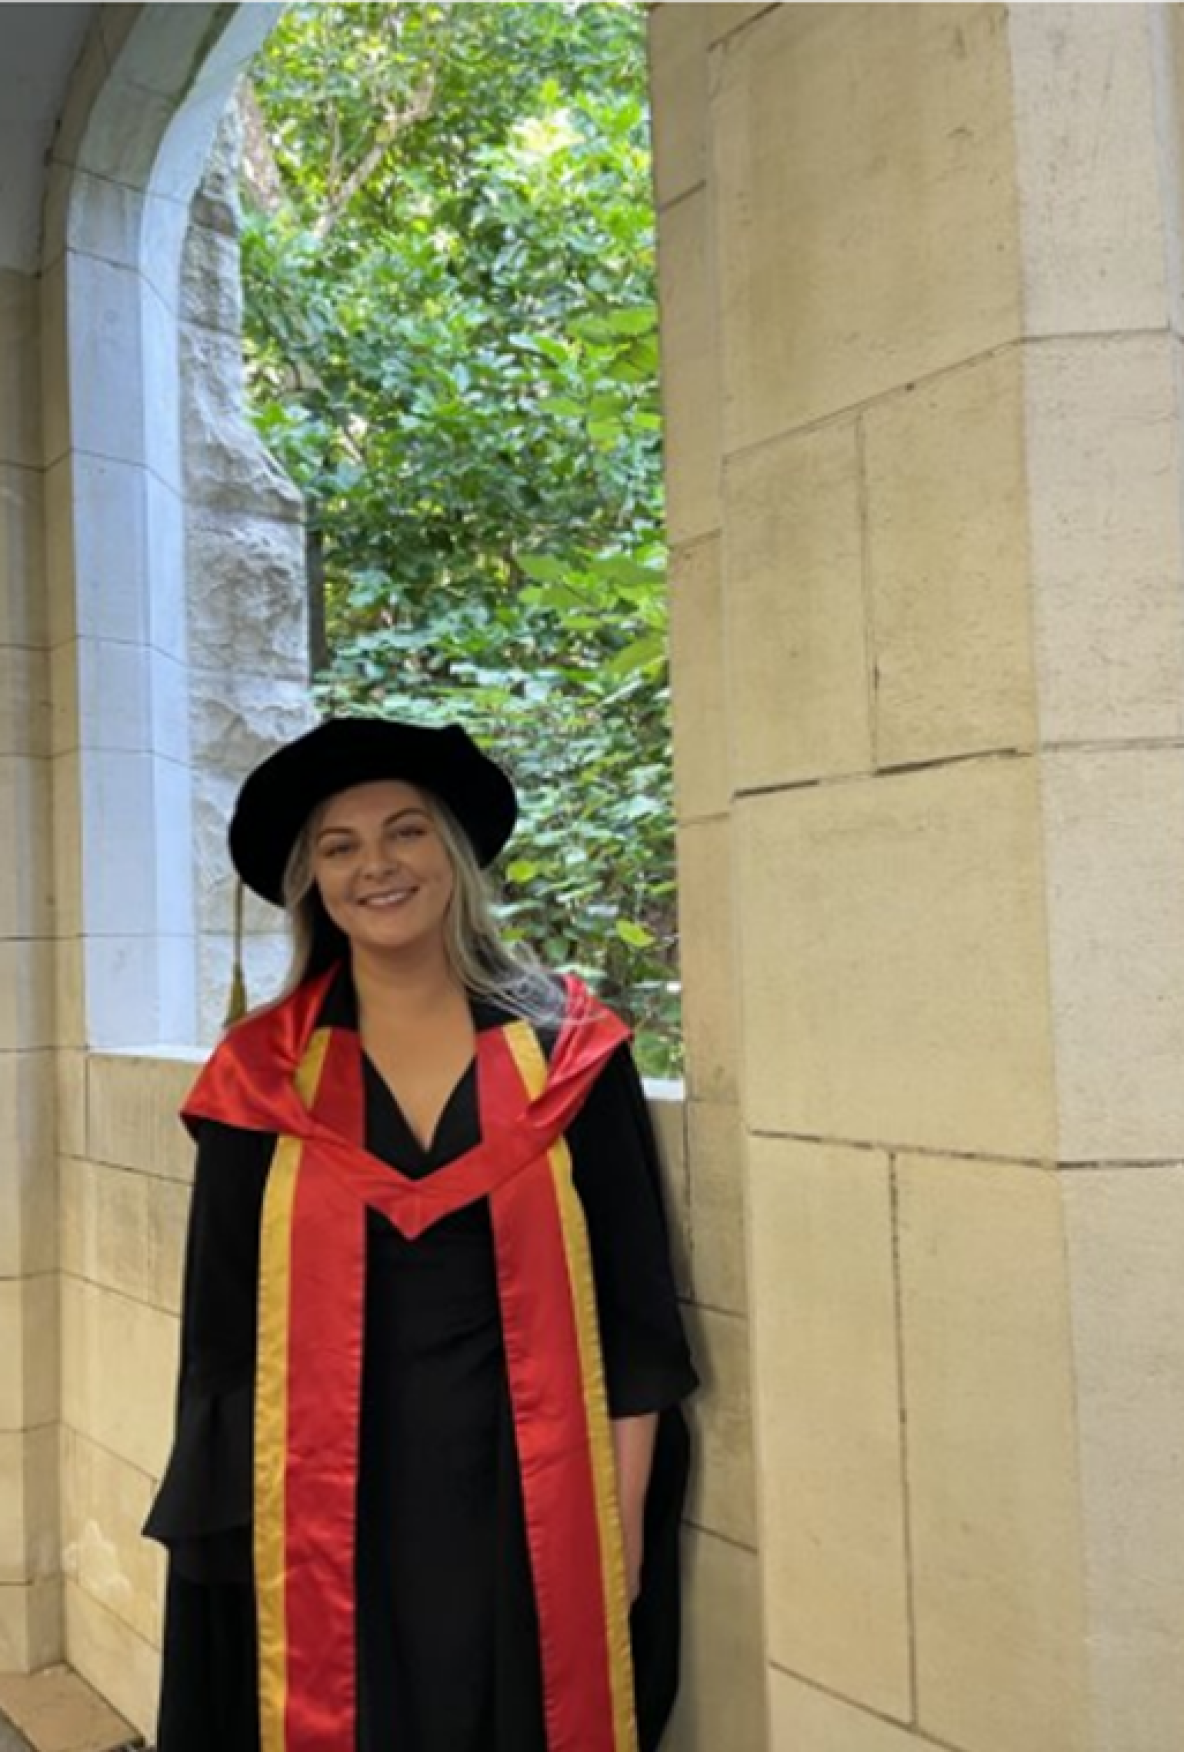 dr lynn buckley in her graduation robes and hat. she is standing in front of a stone wall.